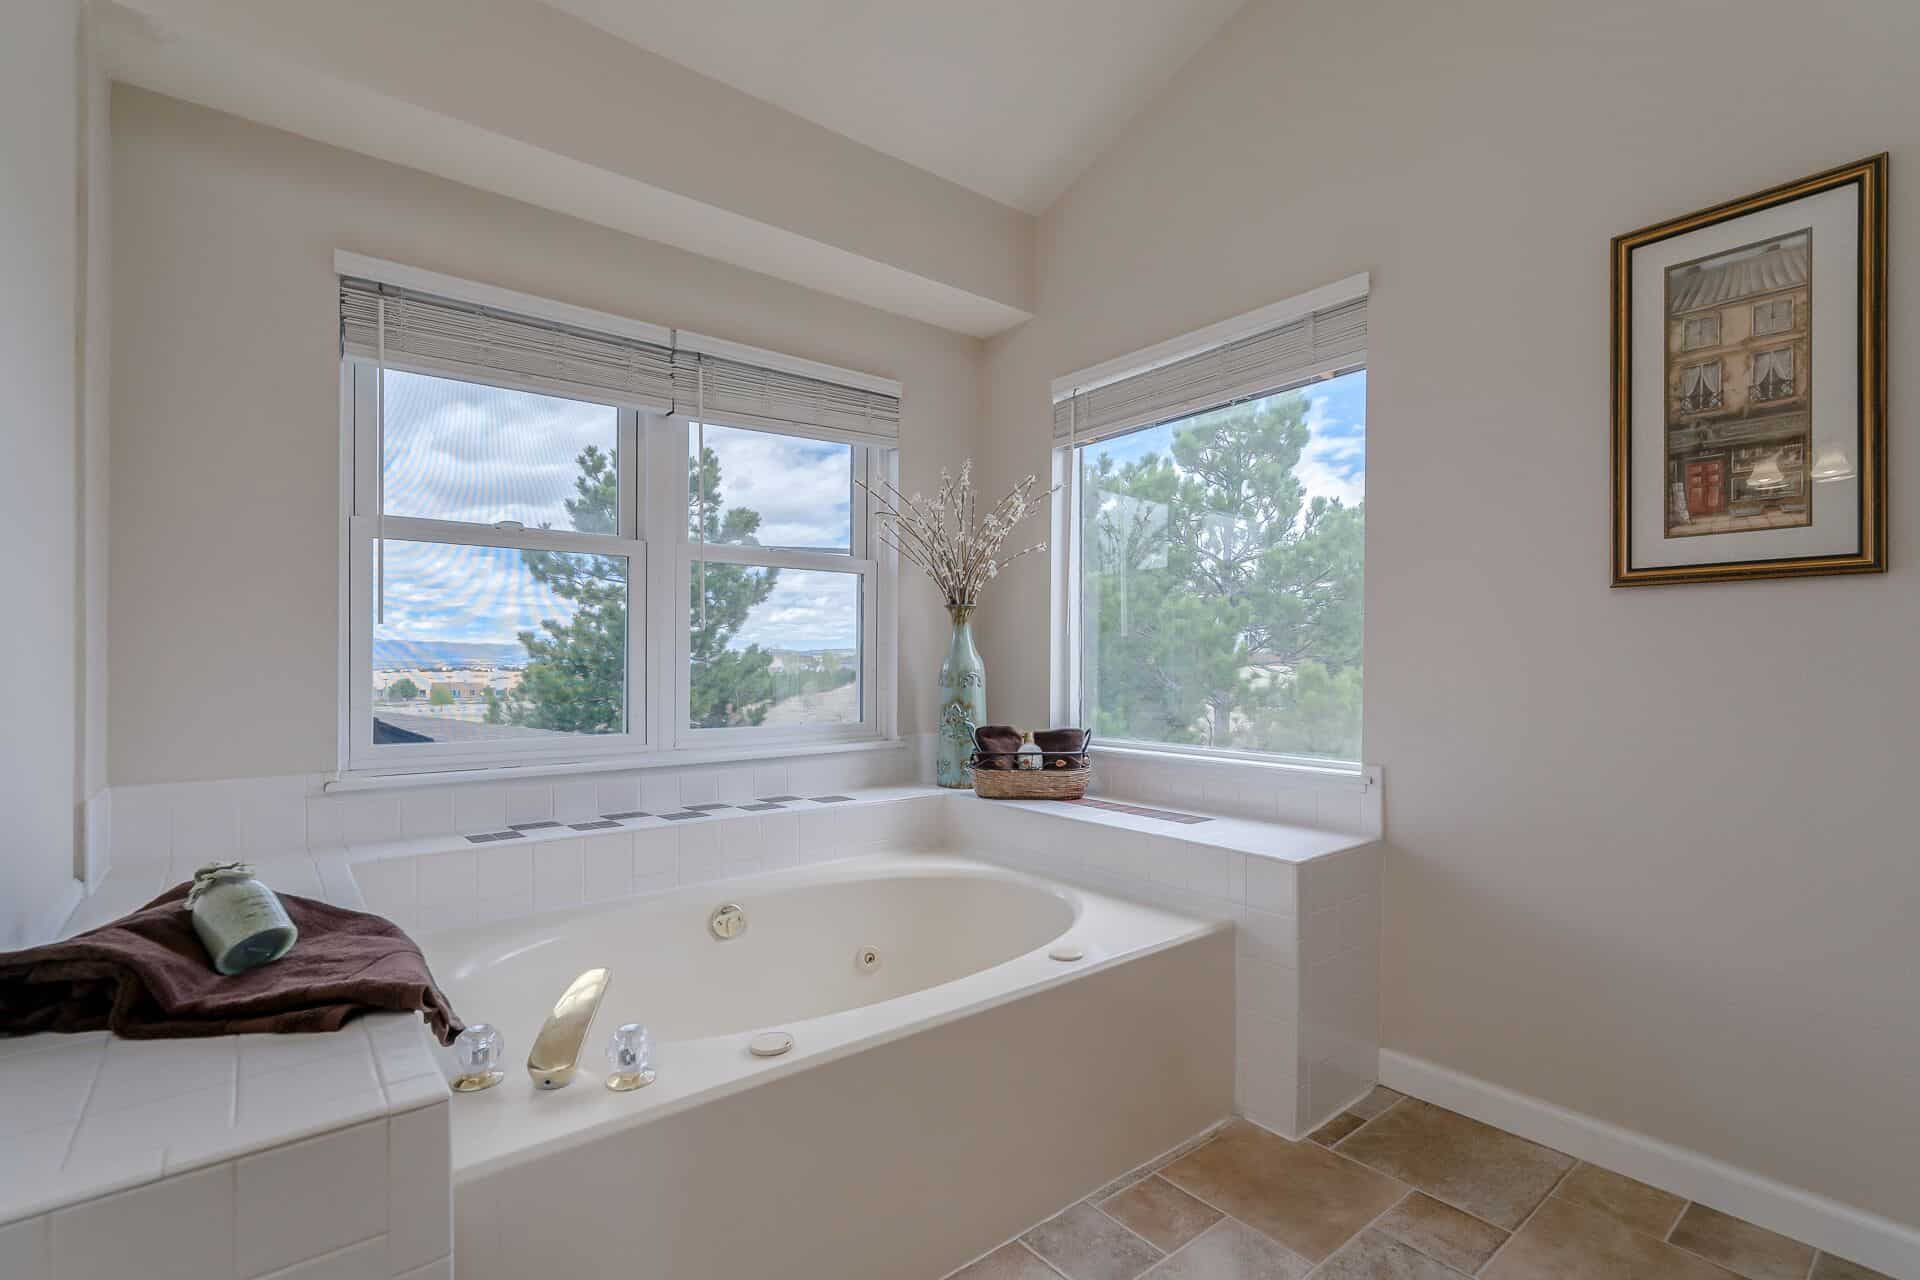 Jetted Tub and Mountain Views from the Window